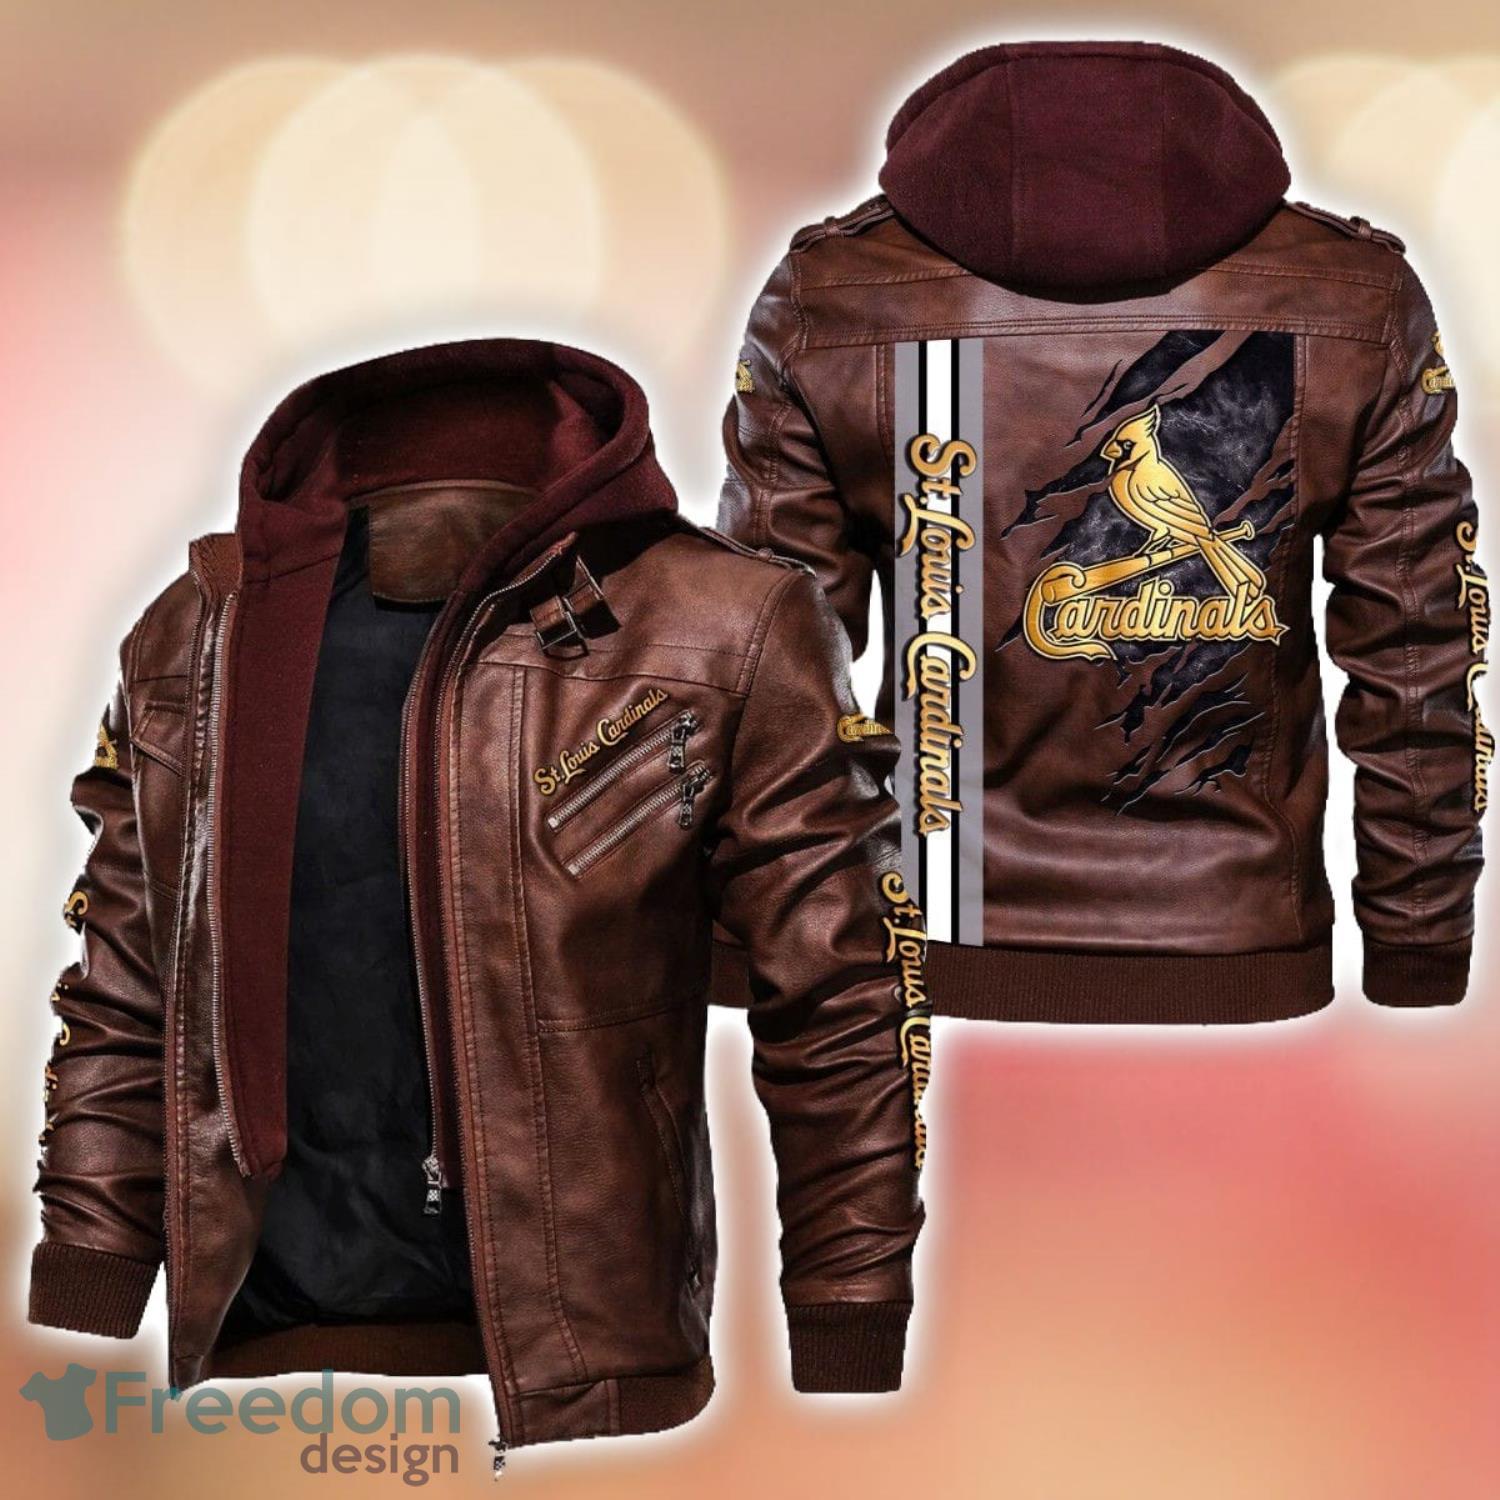 St. Louis Cardinals Leather Jacket For Fans - Freedomdesign